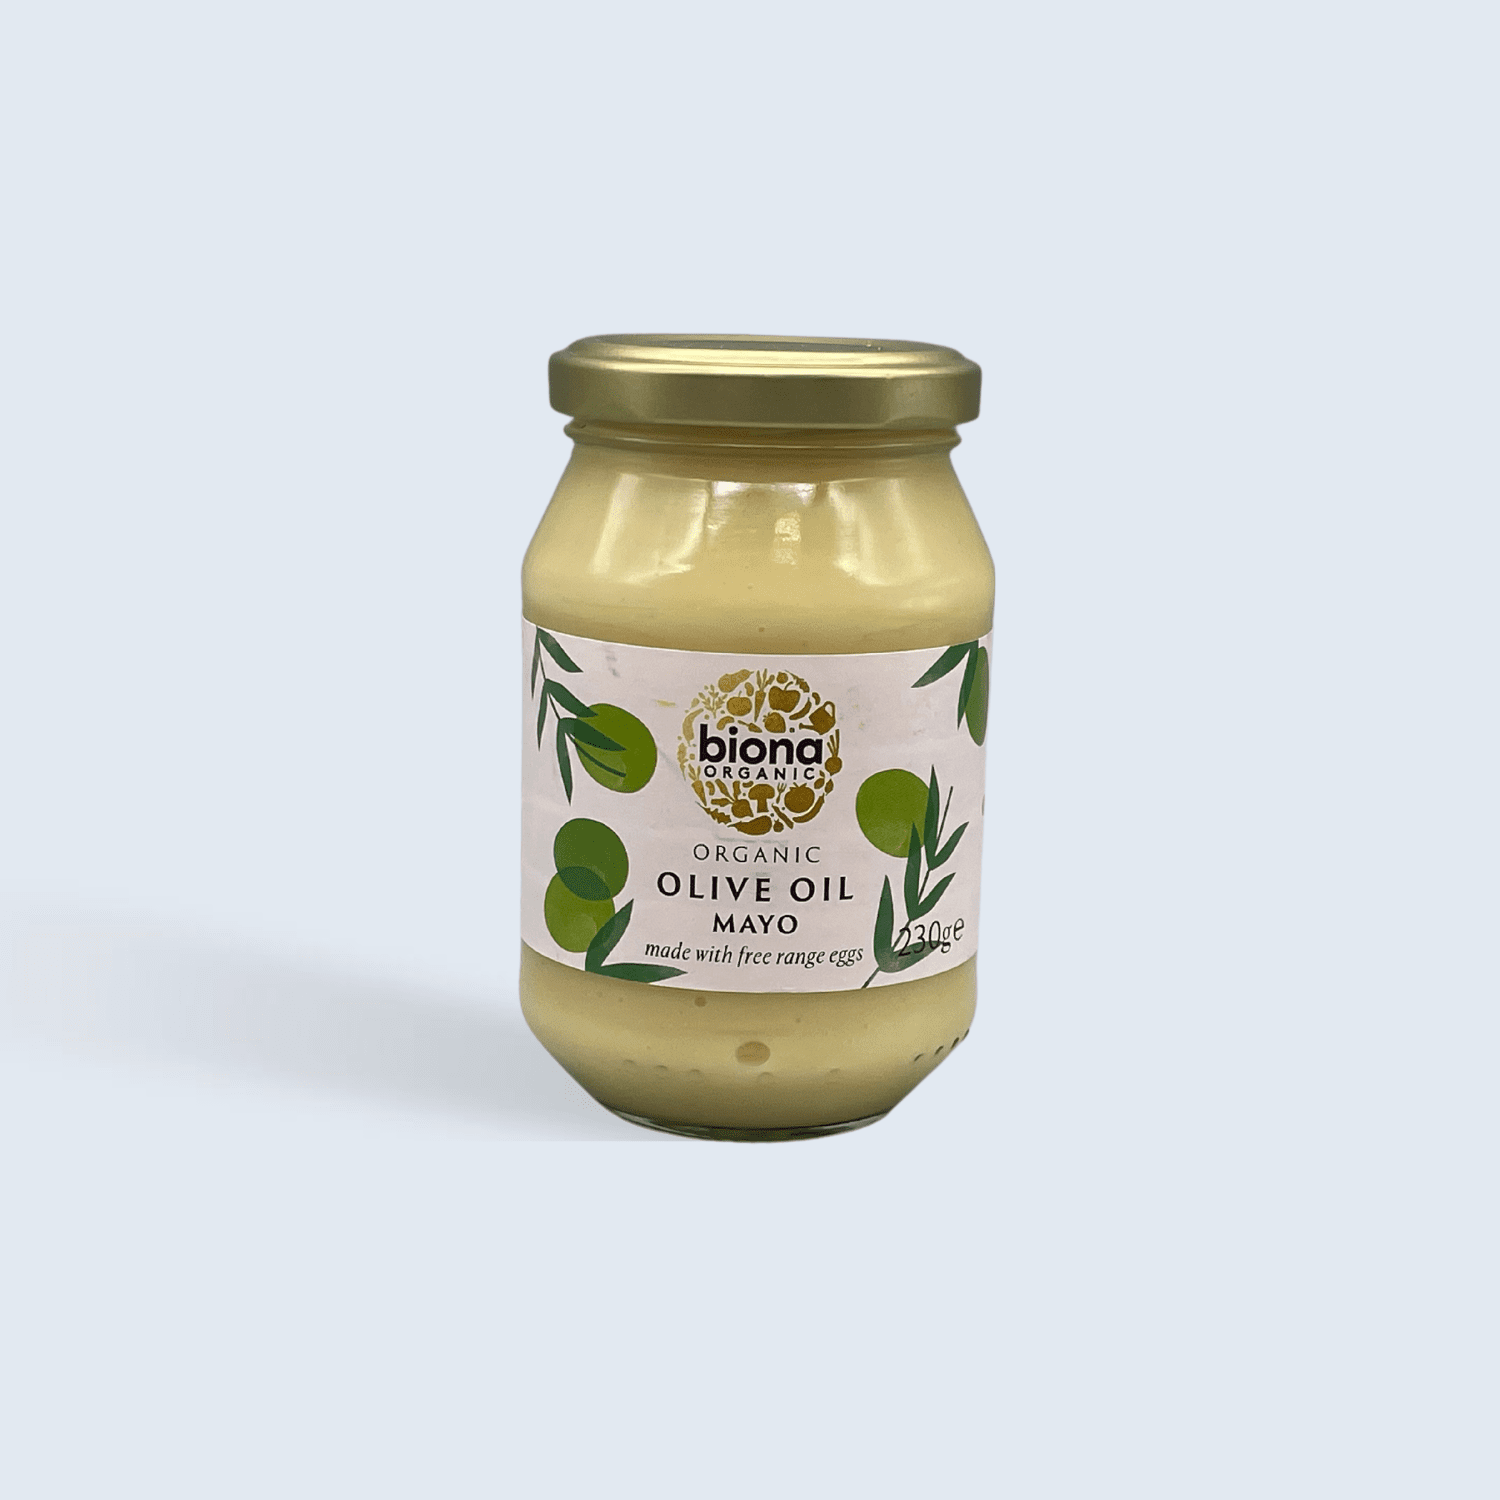 Biona Organic Mayonnaise With Olive Oil 230g